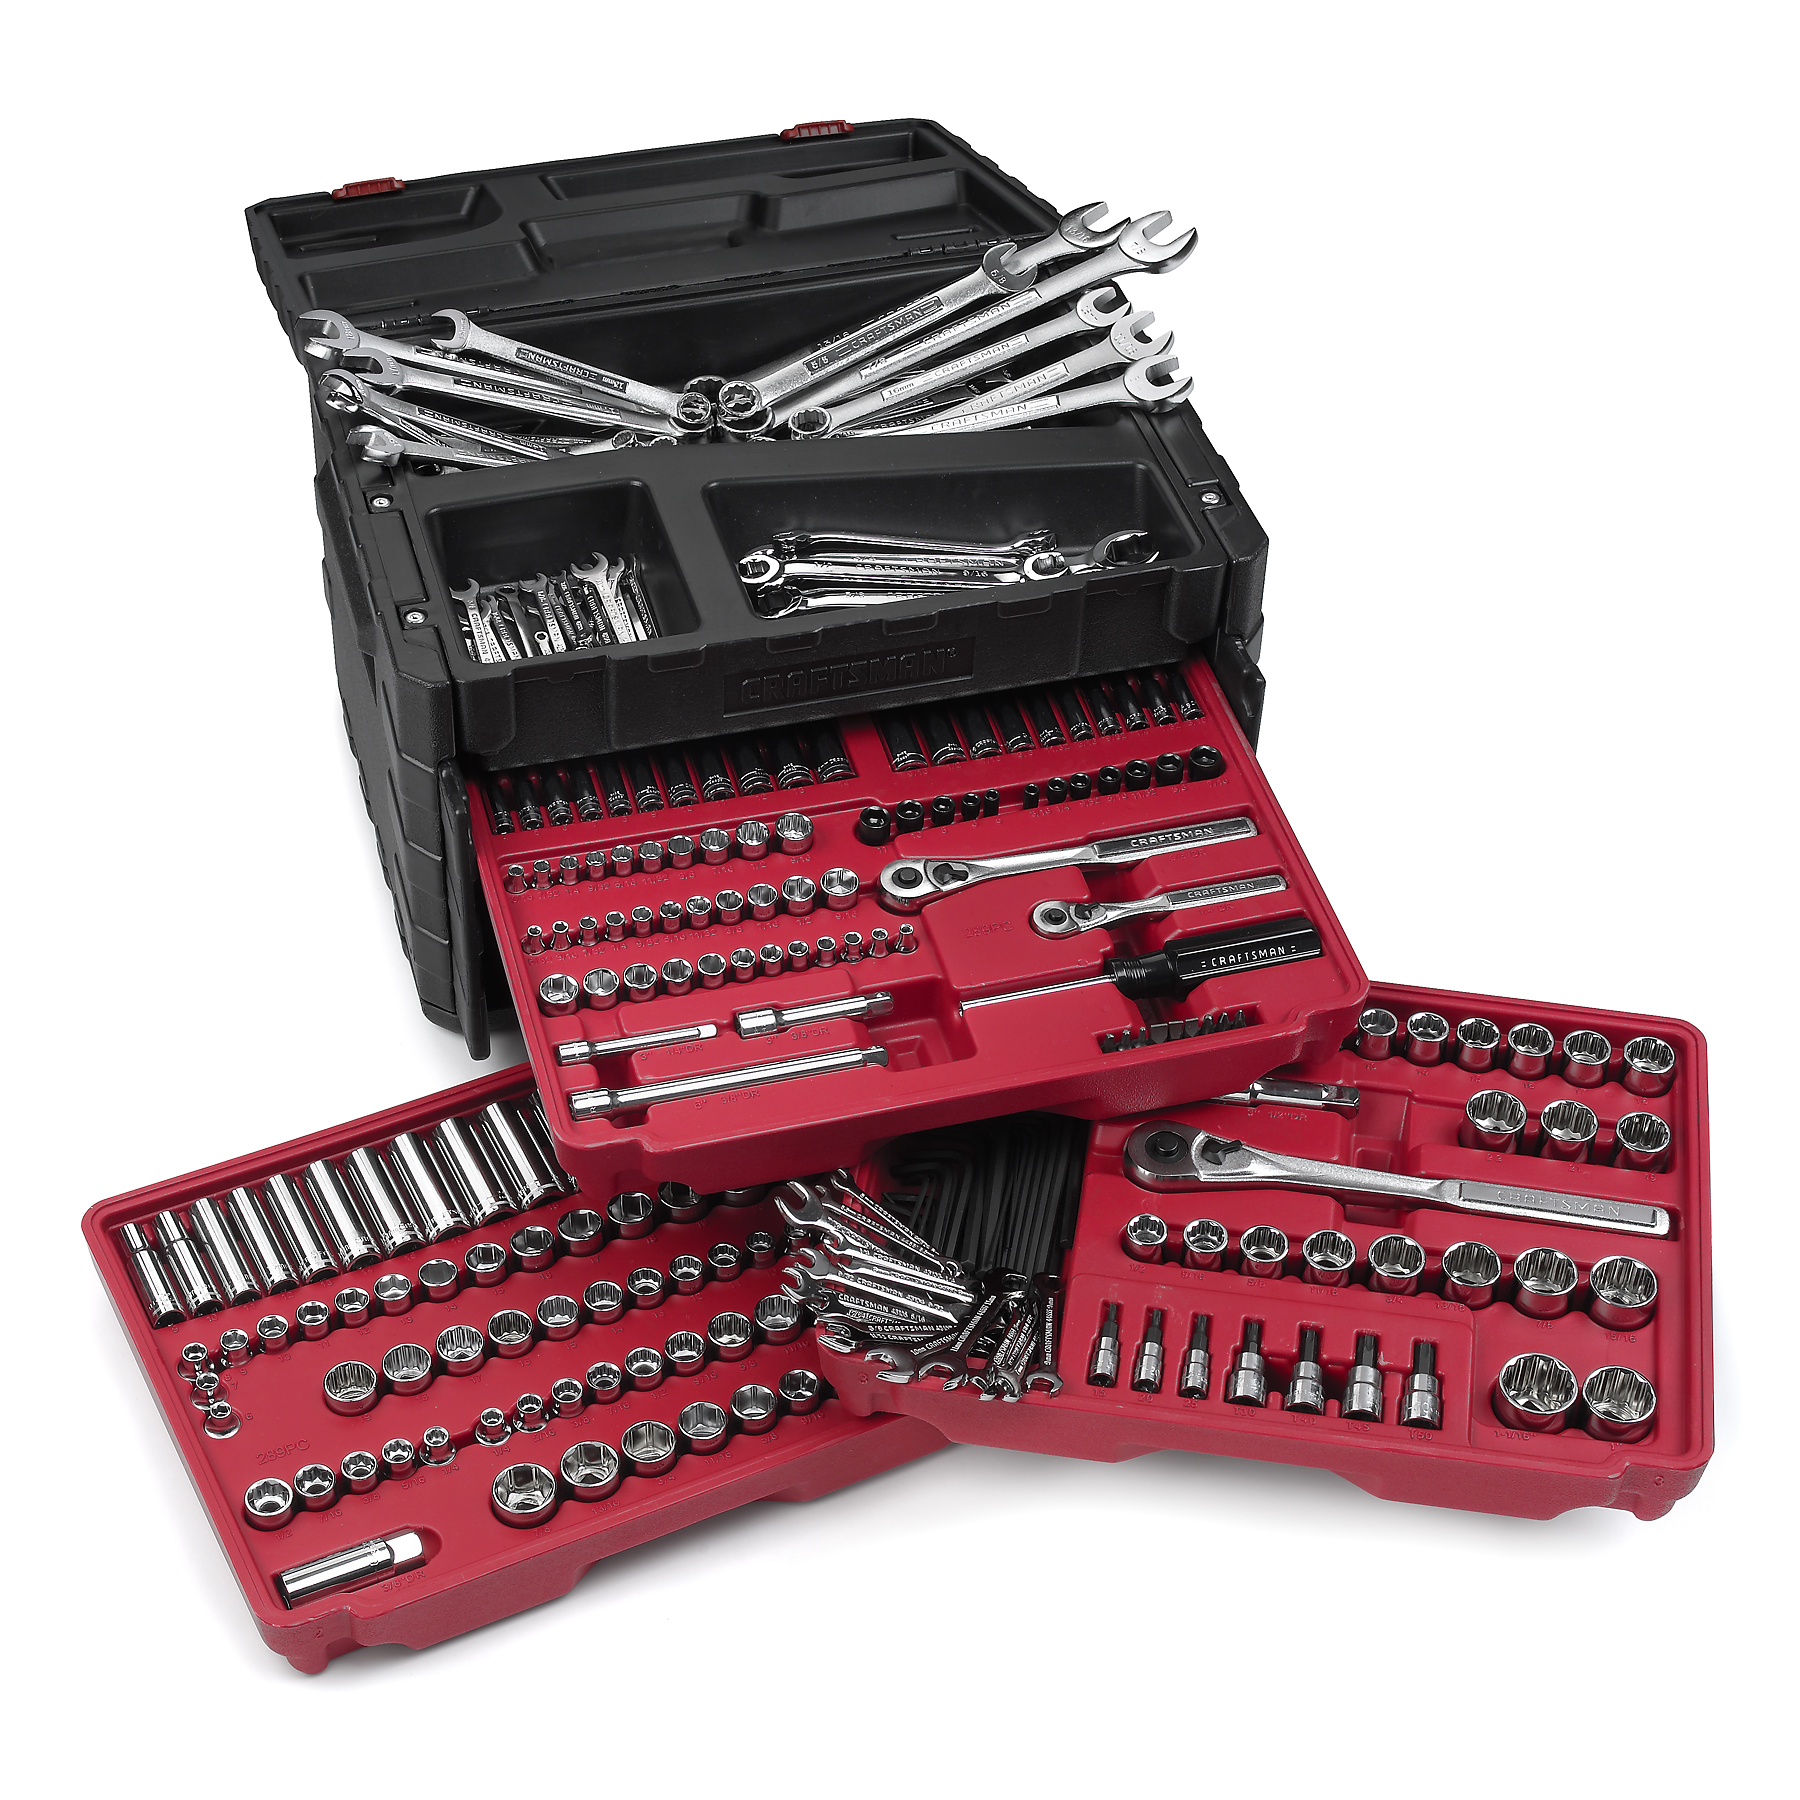 Craftsman 289 Piece Mechanic’s Tool Set with 3-Drawer Chest